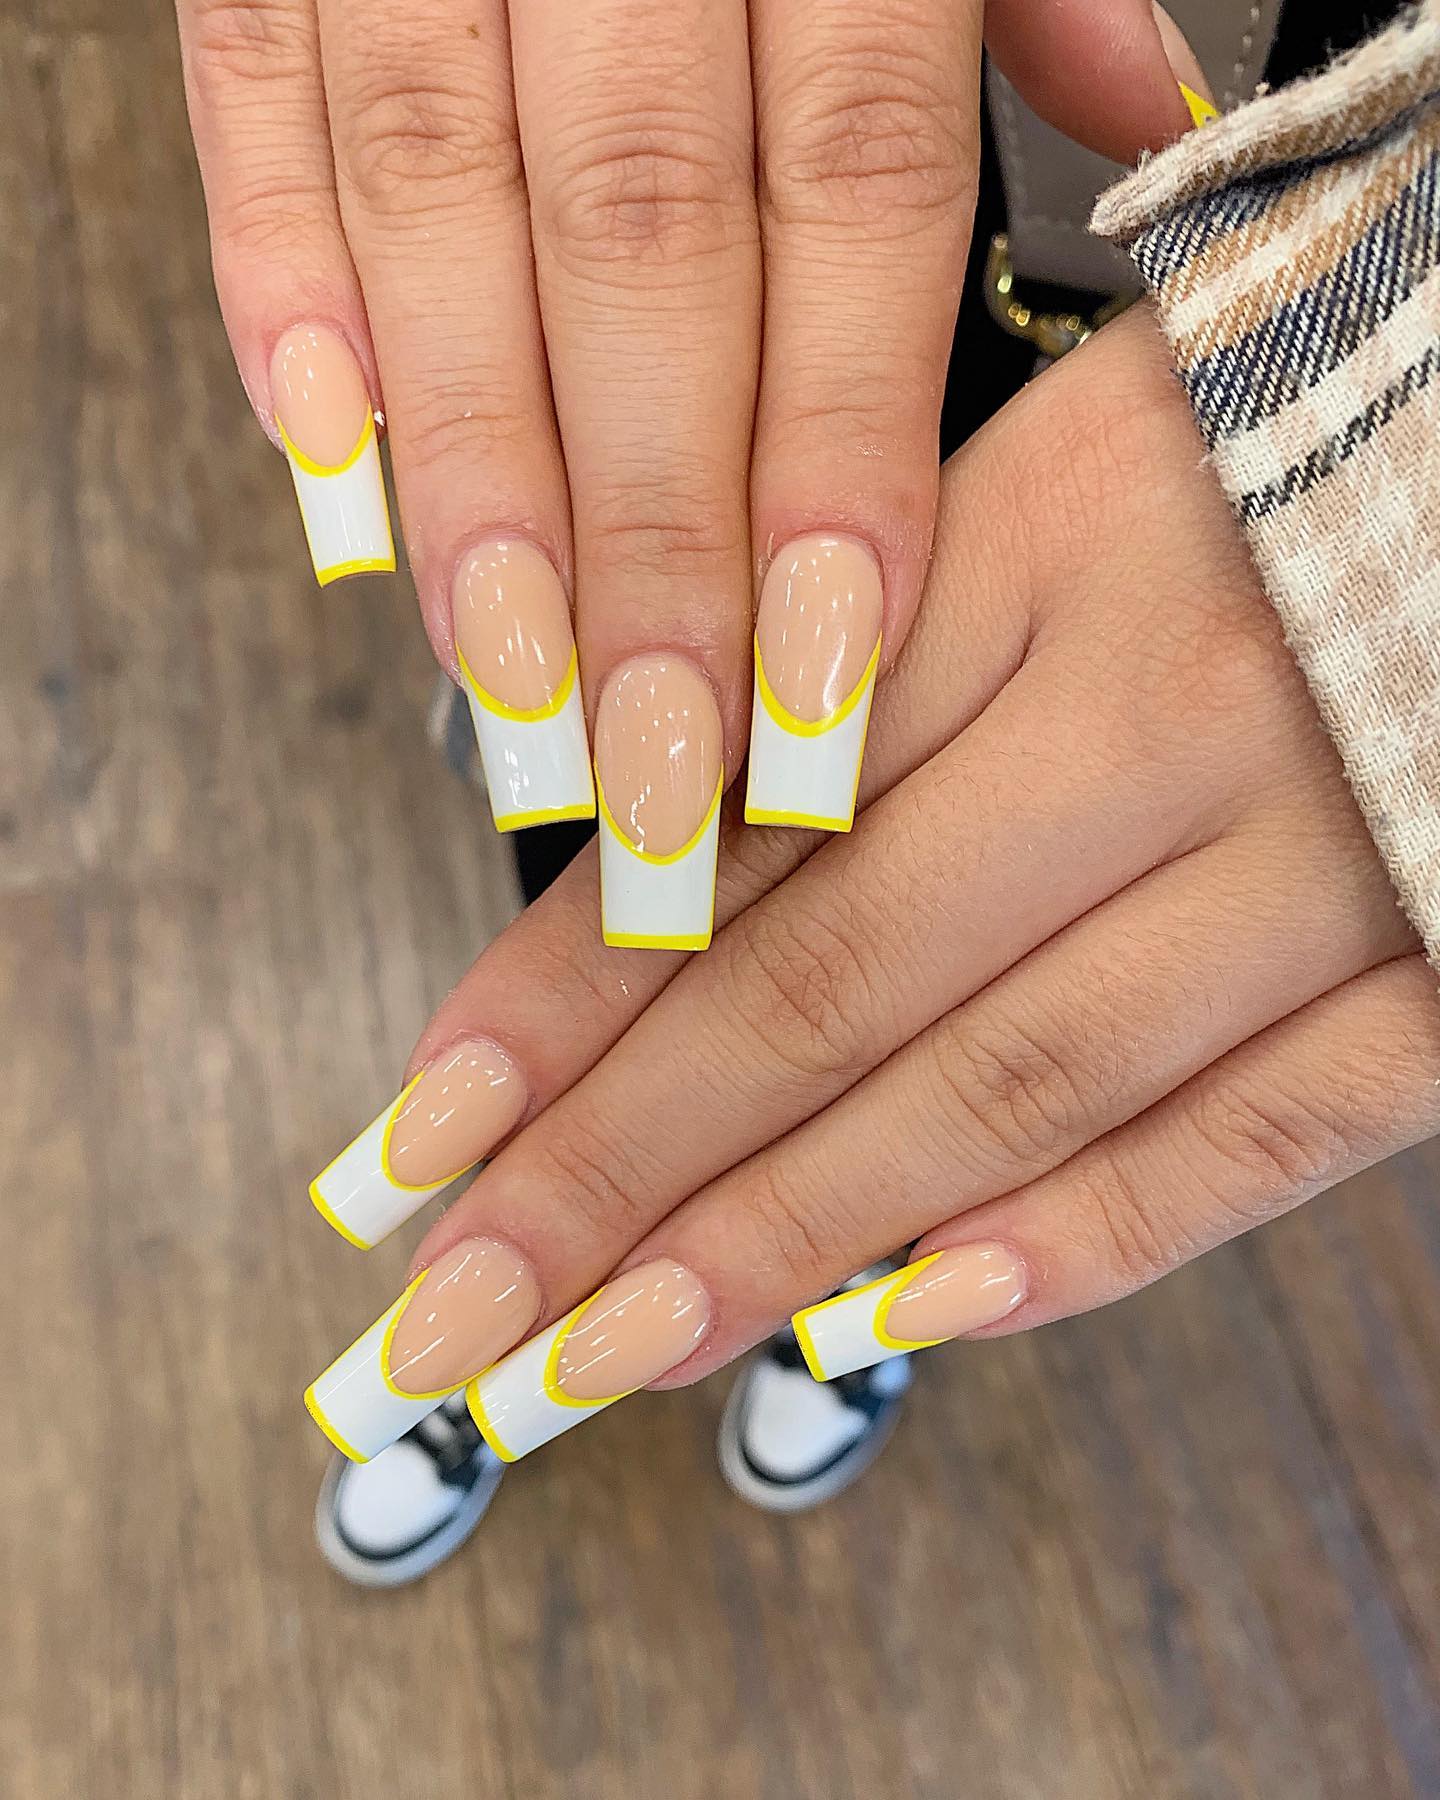 How about this take on French nails? Yellow and white are the best summer colors to consider and try out this summer season!